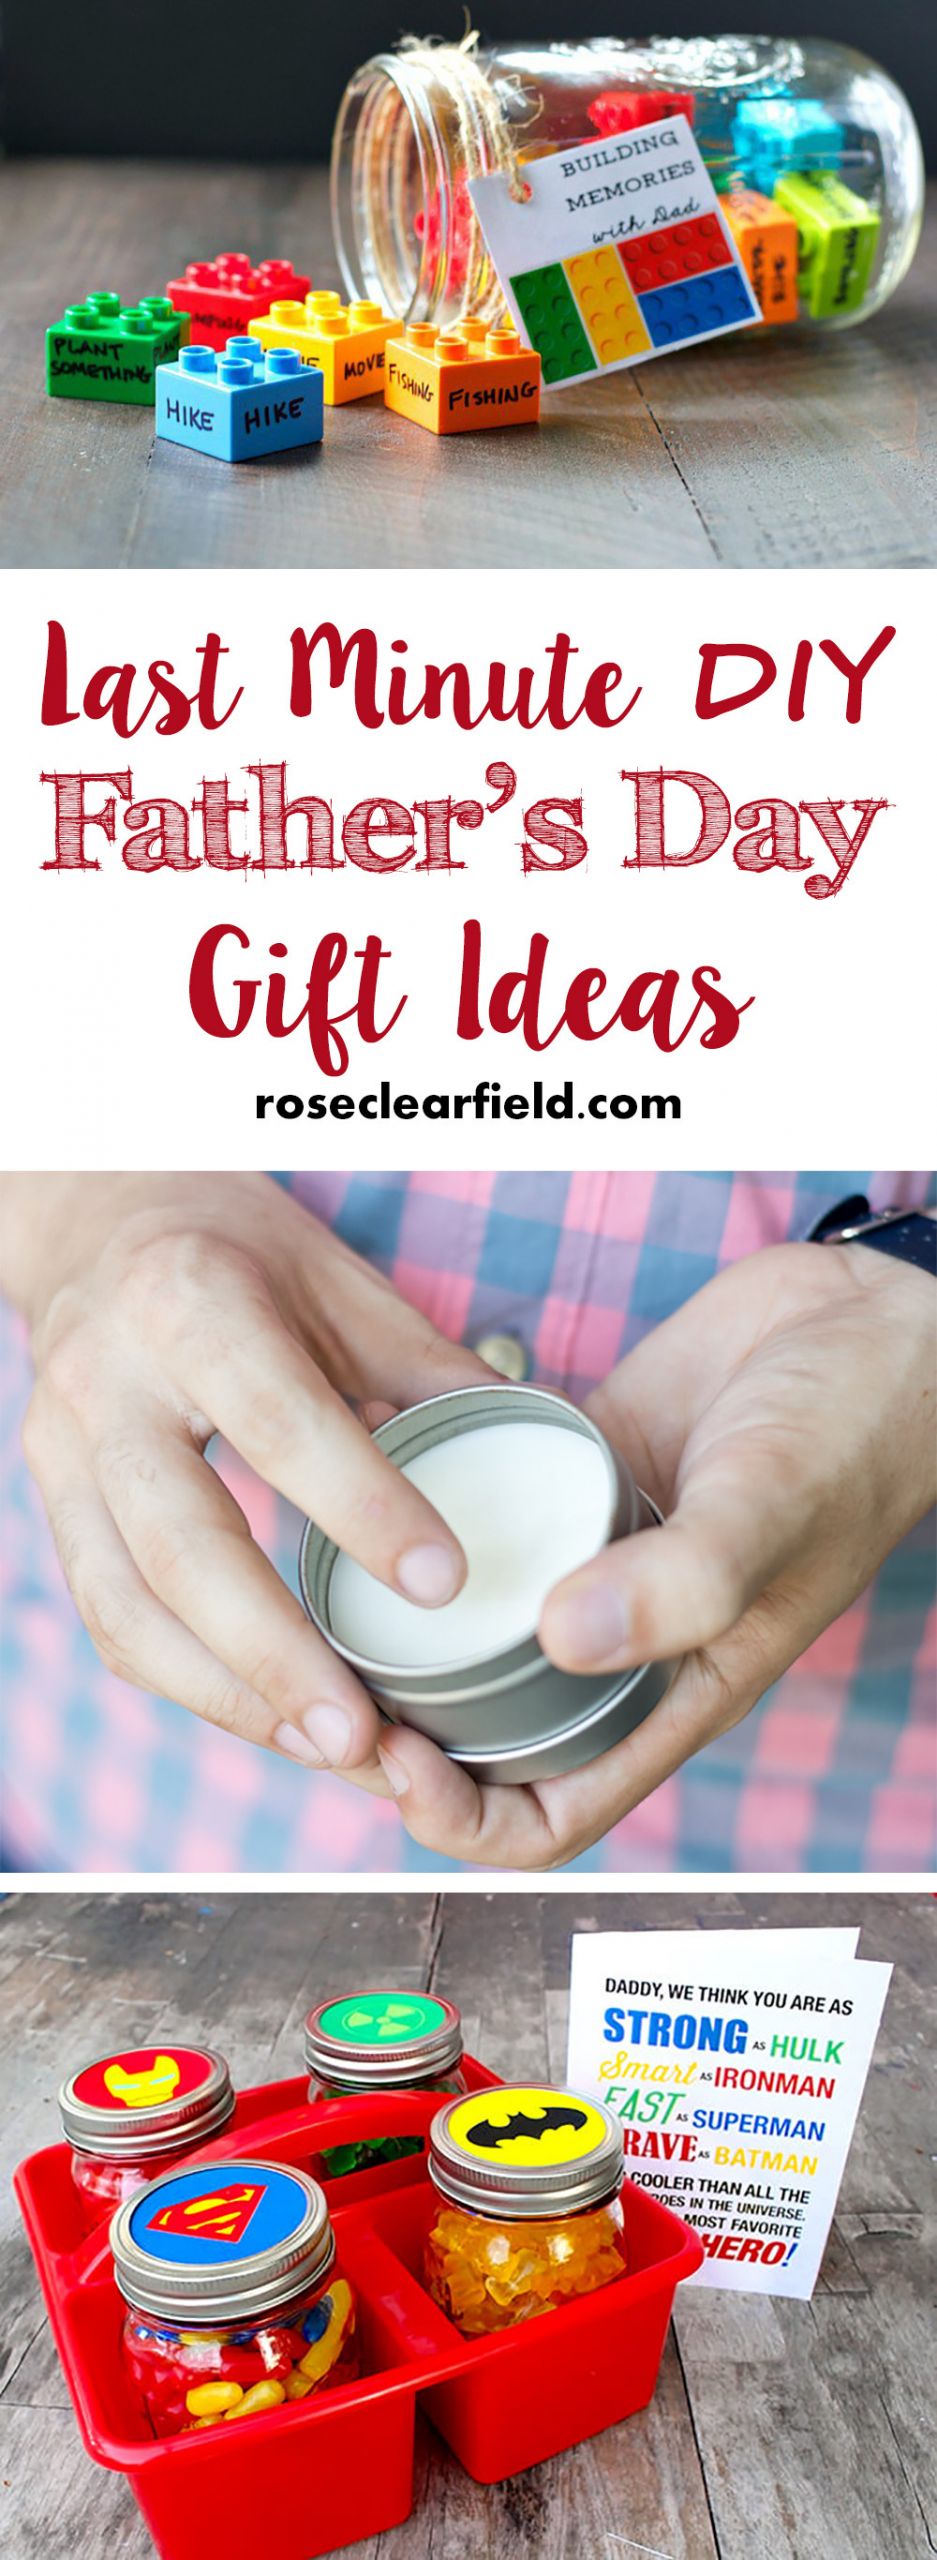 Fathers Day Gifts Ideas
 Last Minute DIY Father s Day Gift Ideas • Rose Clearfield